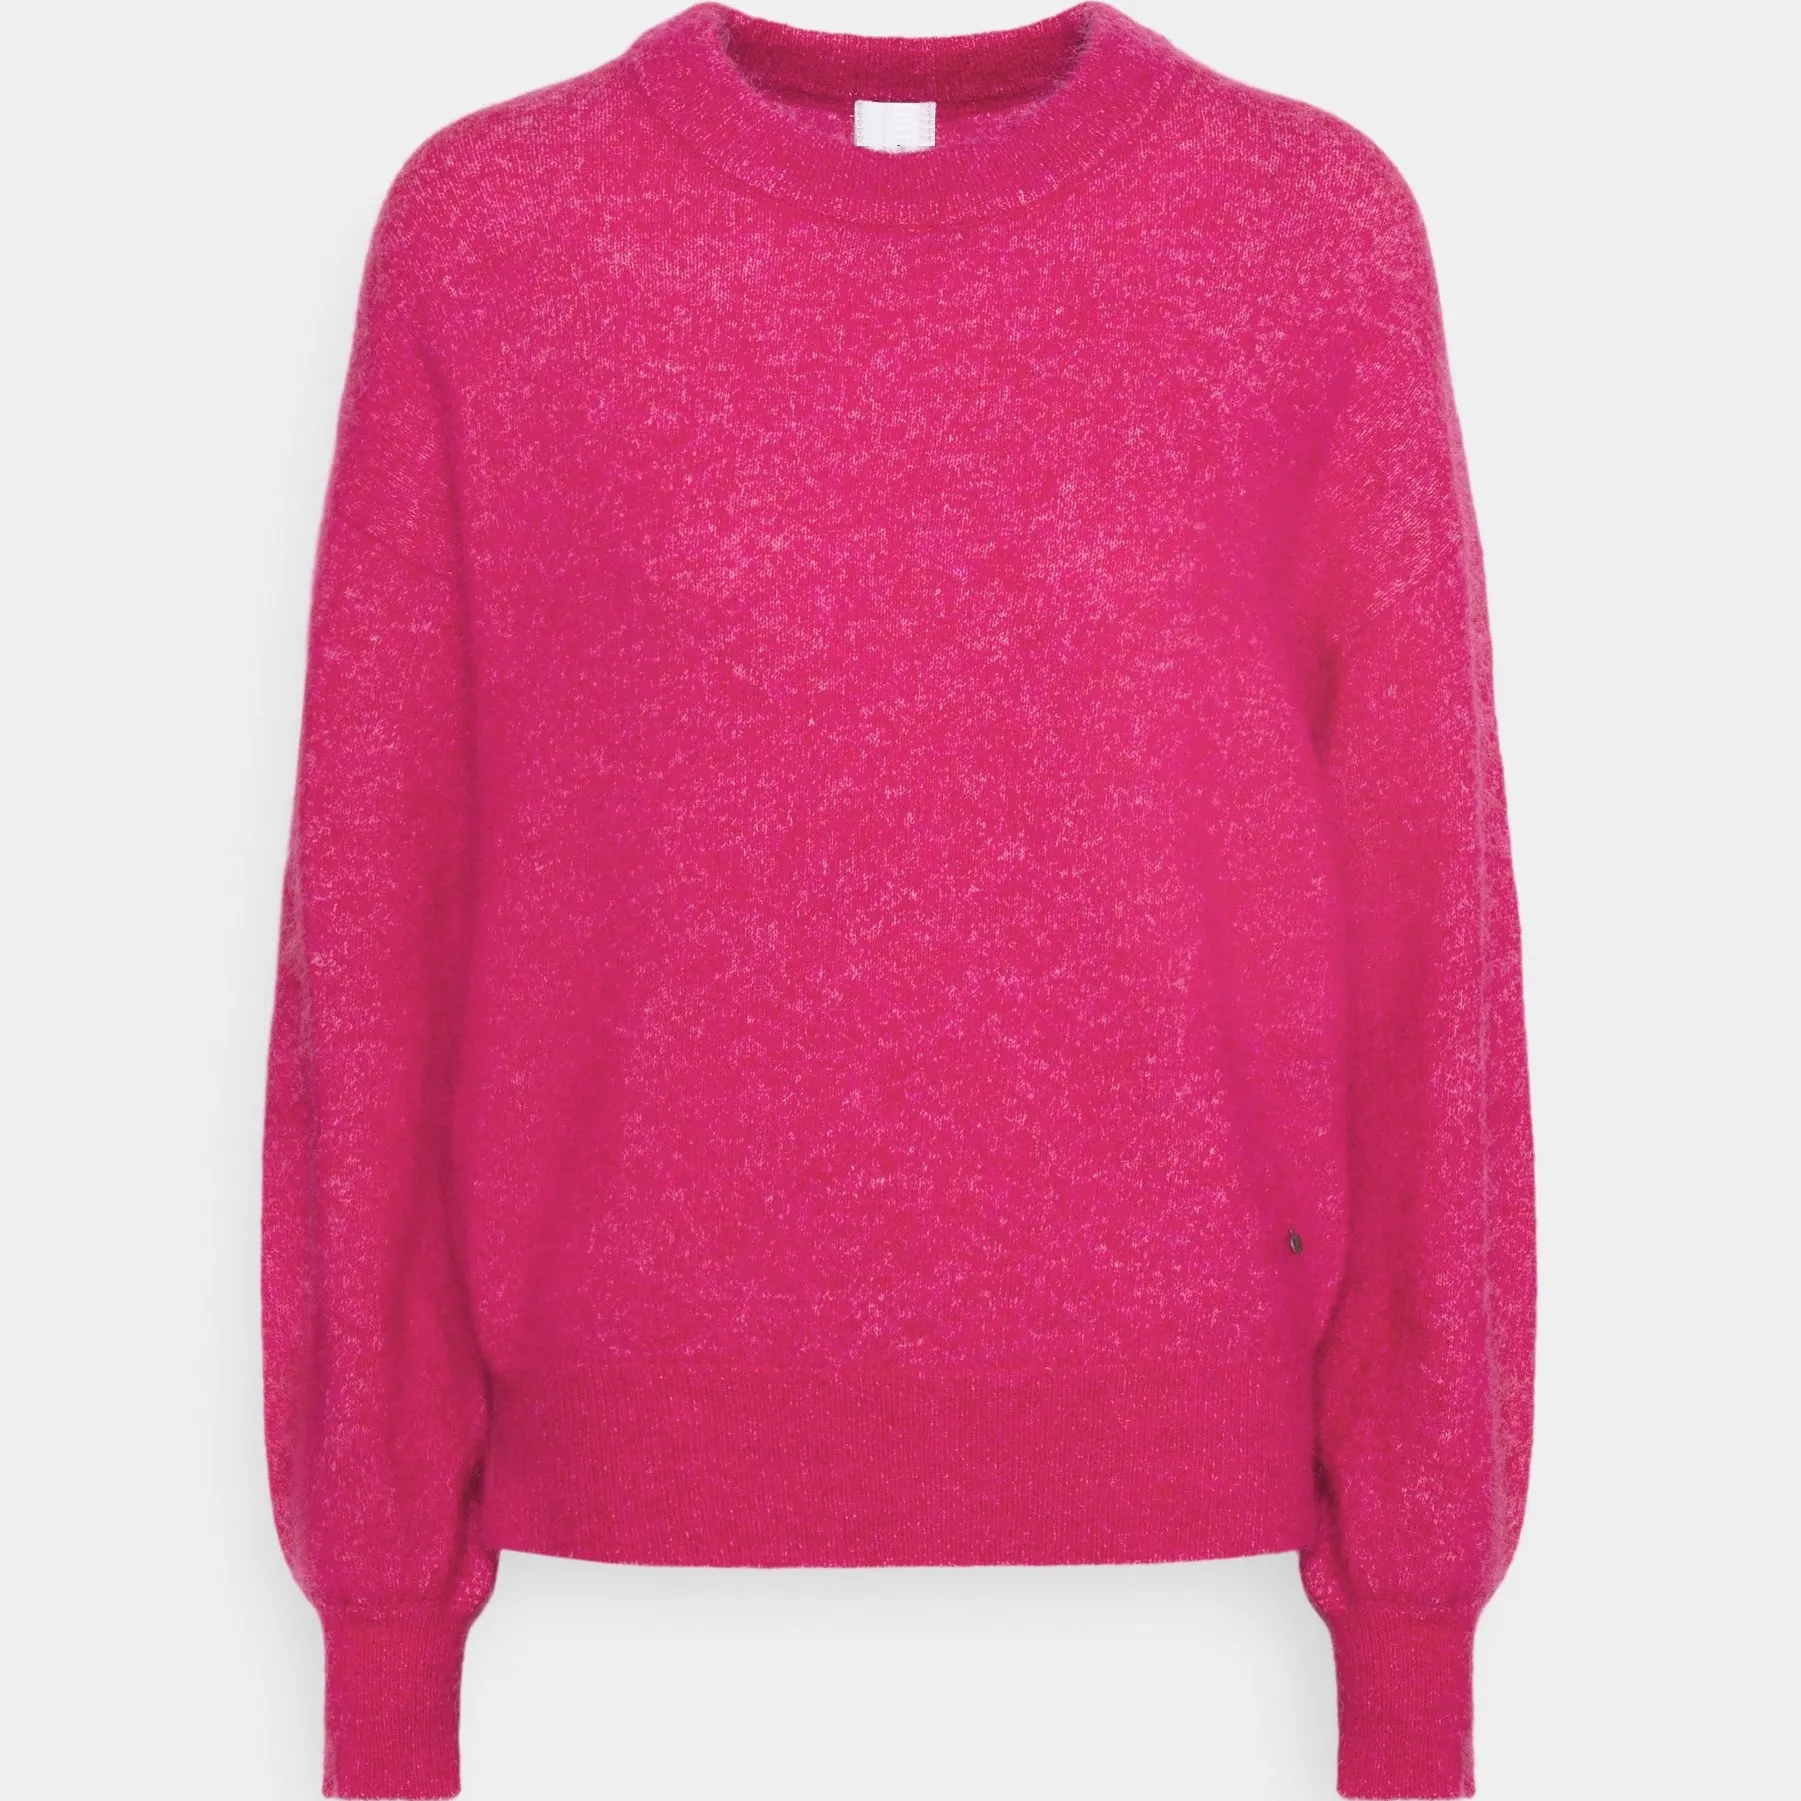 Plain Pink Color Ladies Crew Neck Jacquard Knitted sweaters